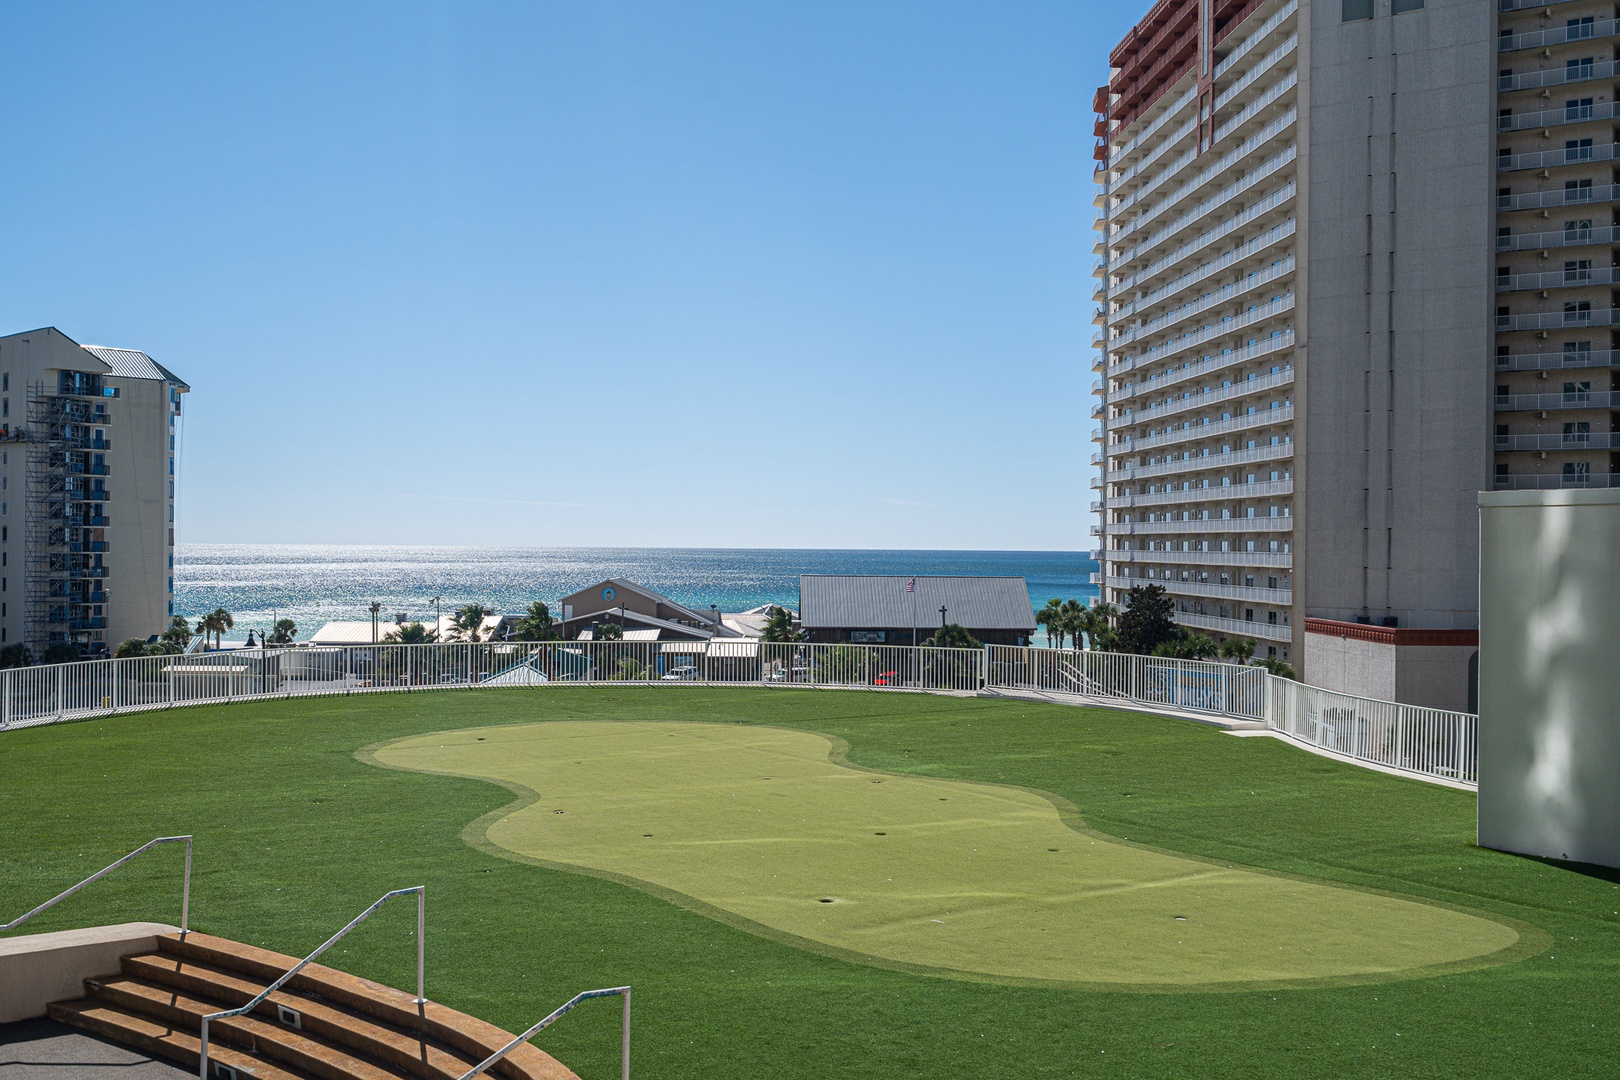 Practice your putting with sparkling ocean views on the community green!